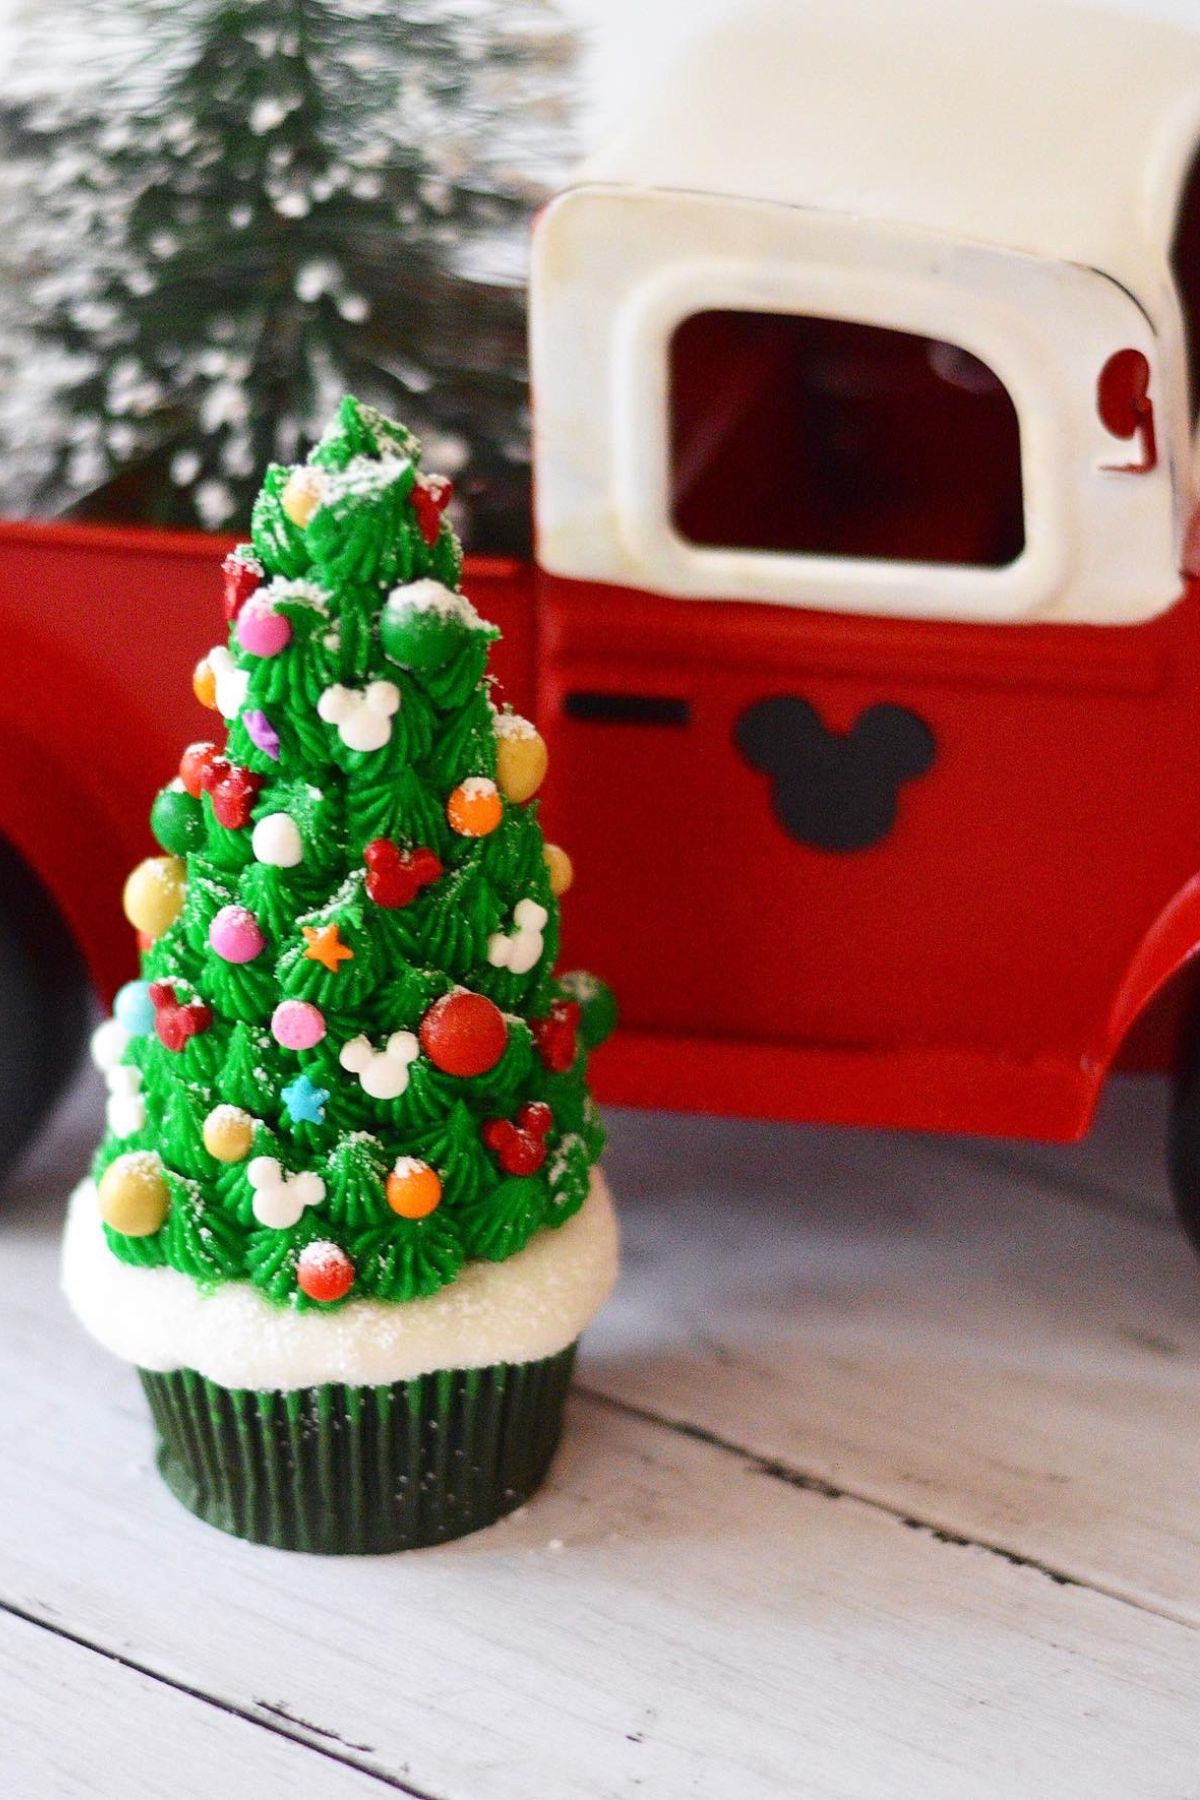 These Christmas tree cupcakes are filled with Disney's Grey Stuff and topped with a beautiful decorated Mickey shaped ice cream cone tree.  